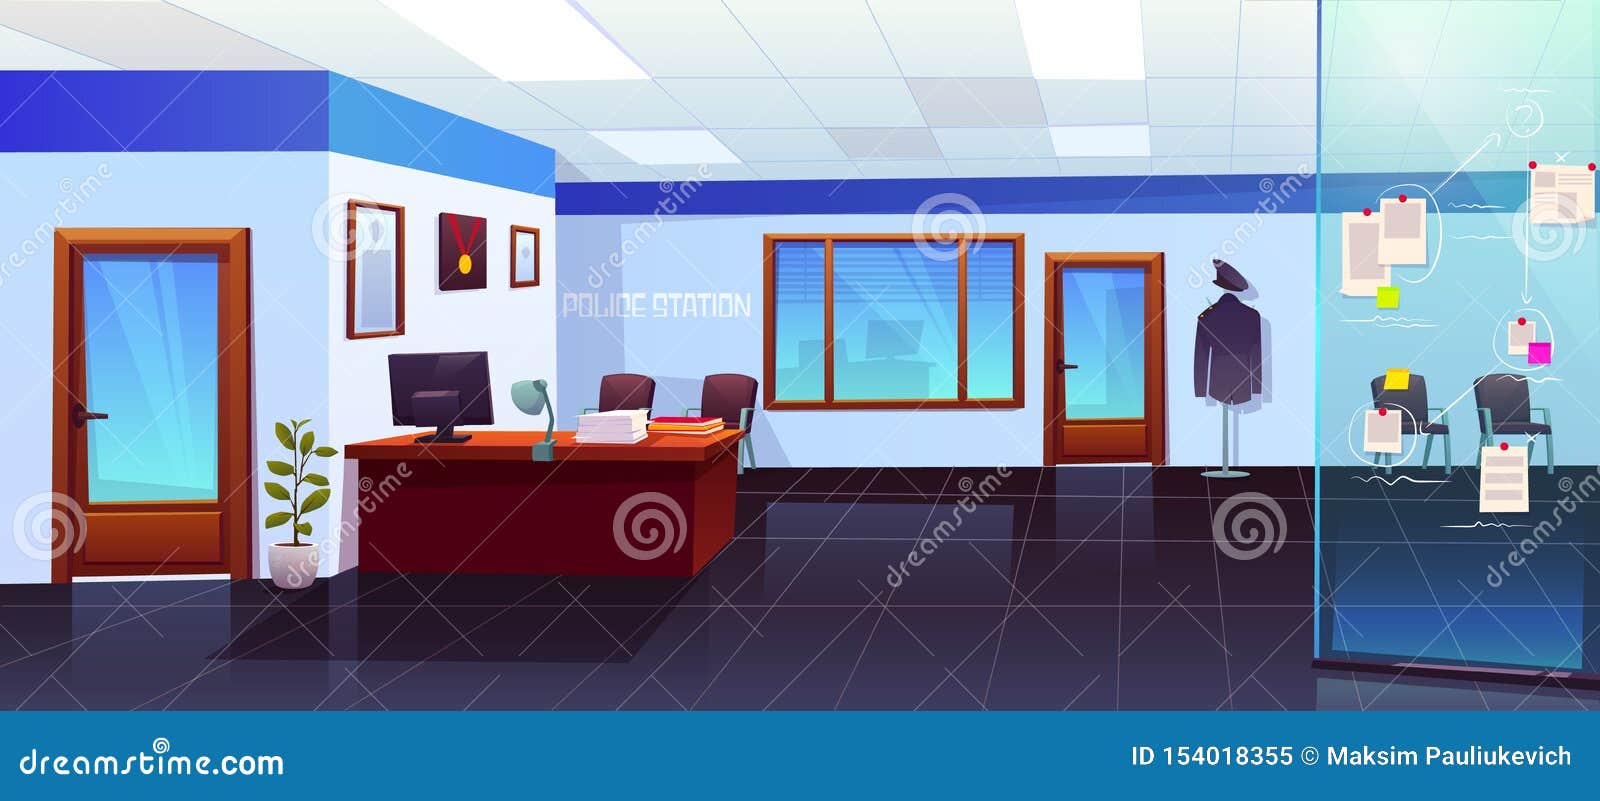 Police Station Room Interior With Evidence Board Stock